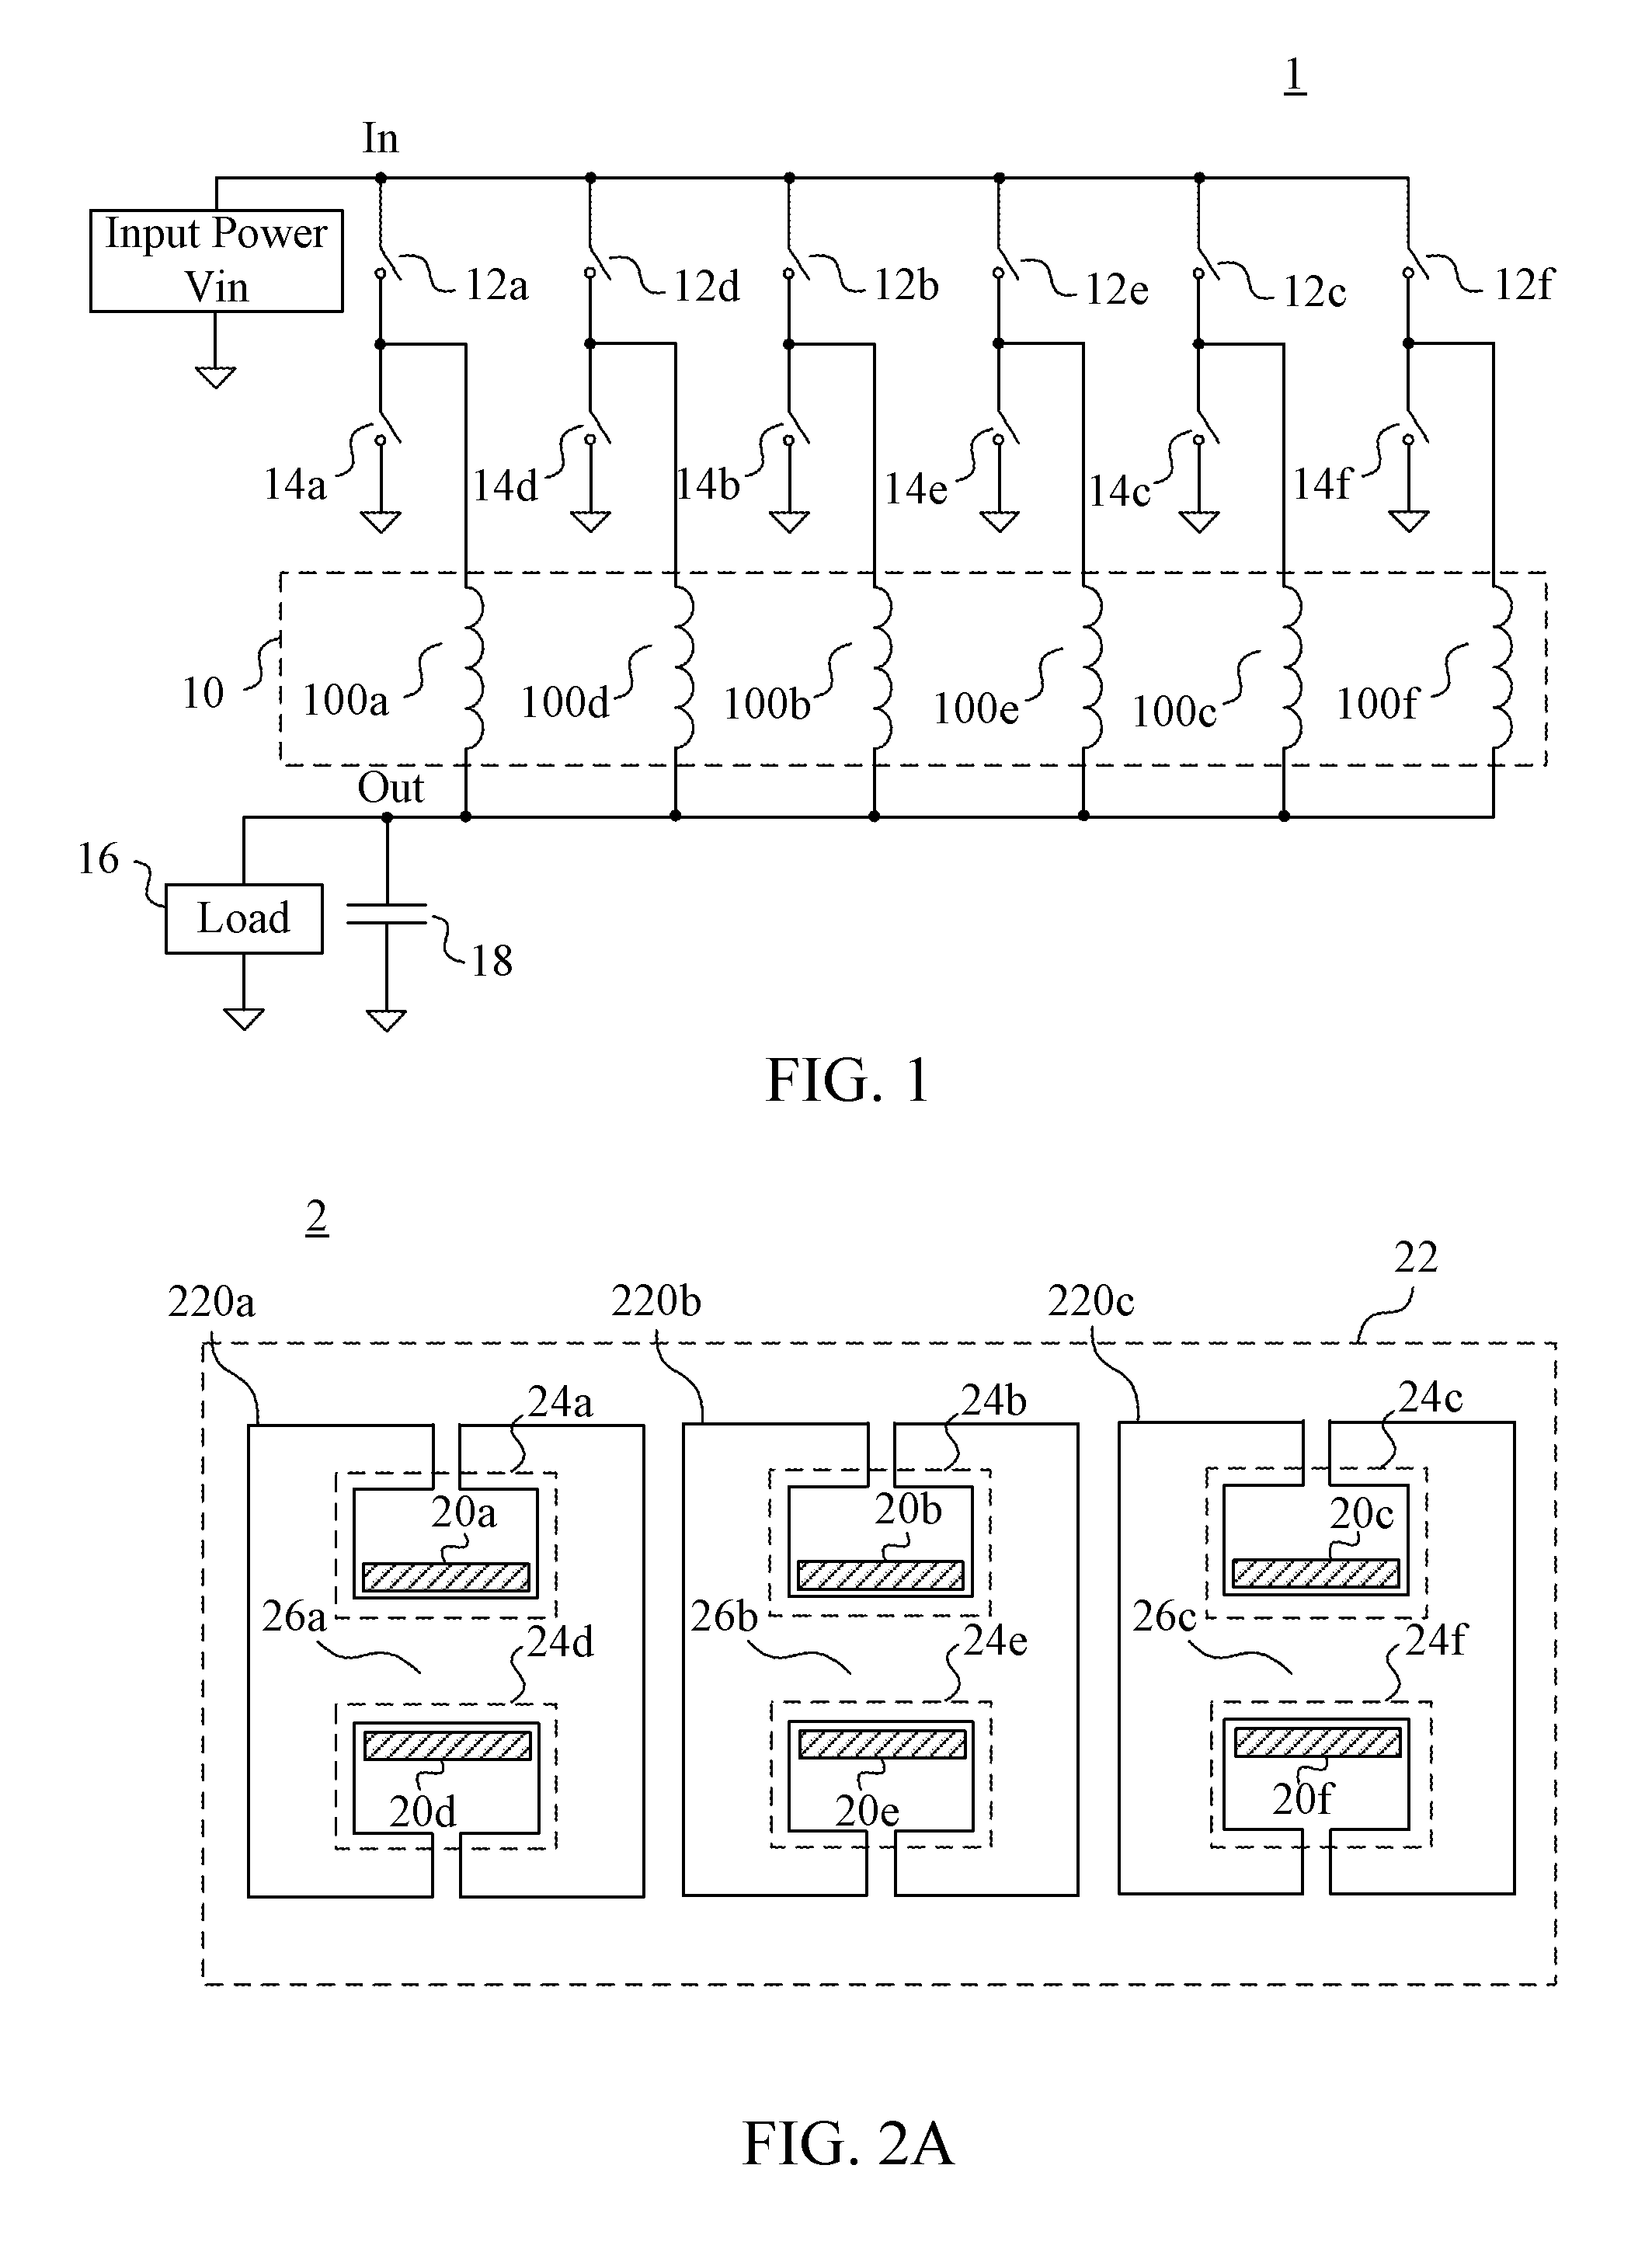 Power converter and device integrating inductors in parallel of the same